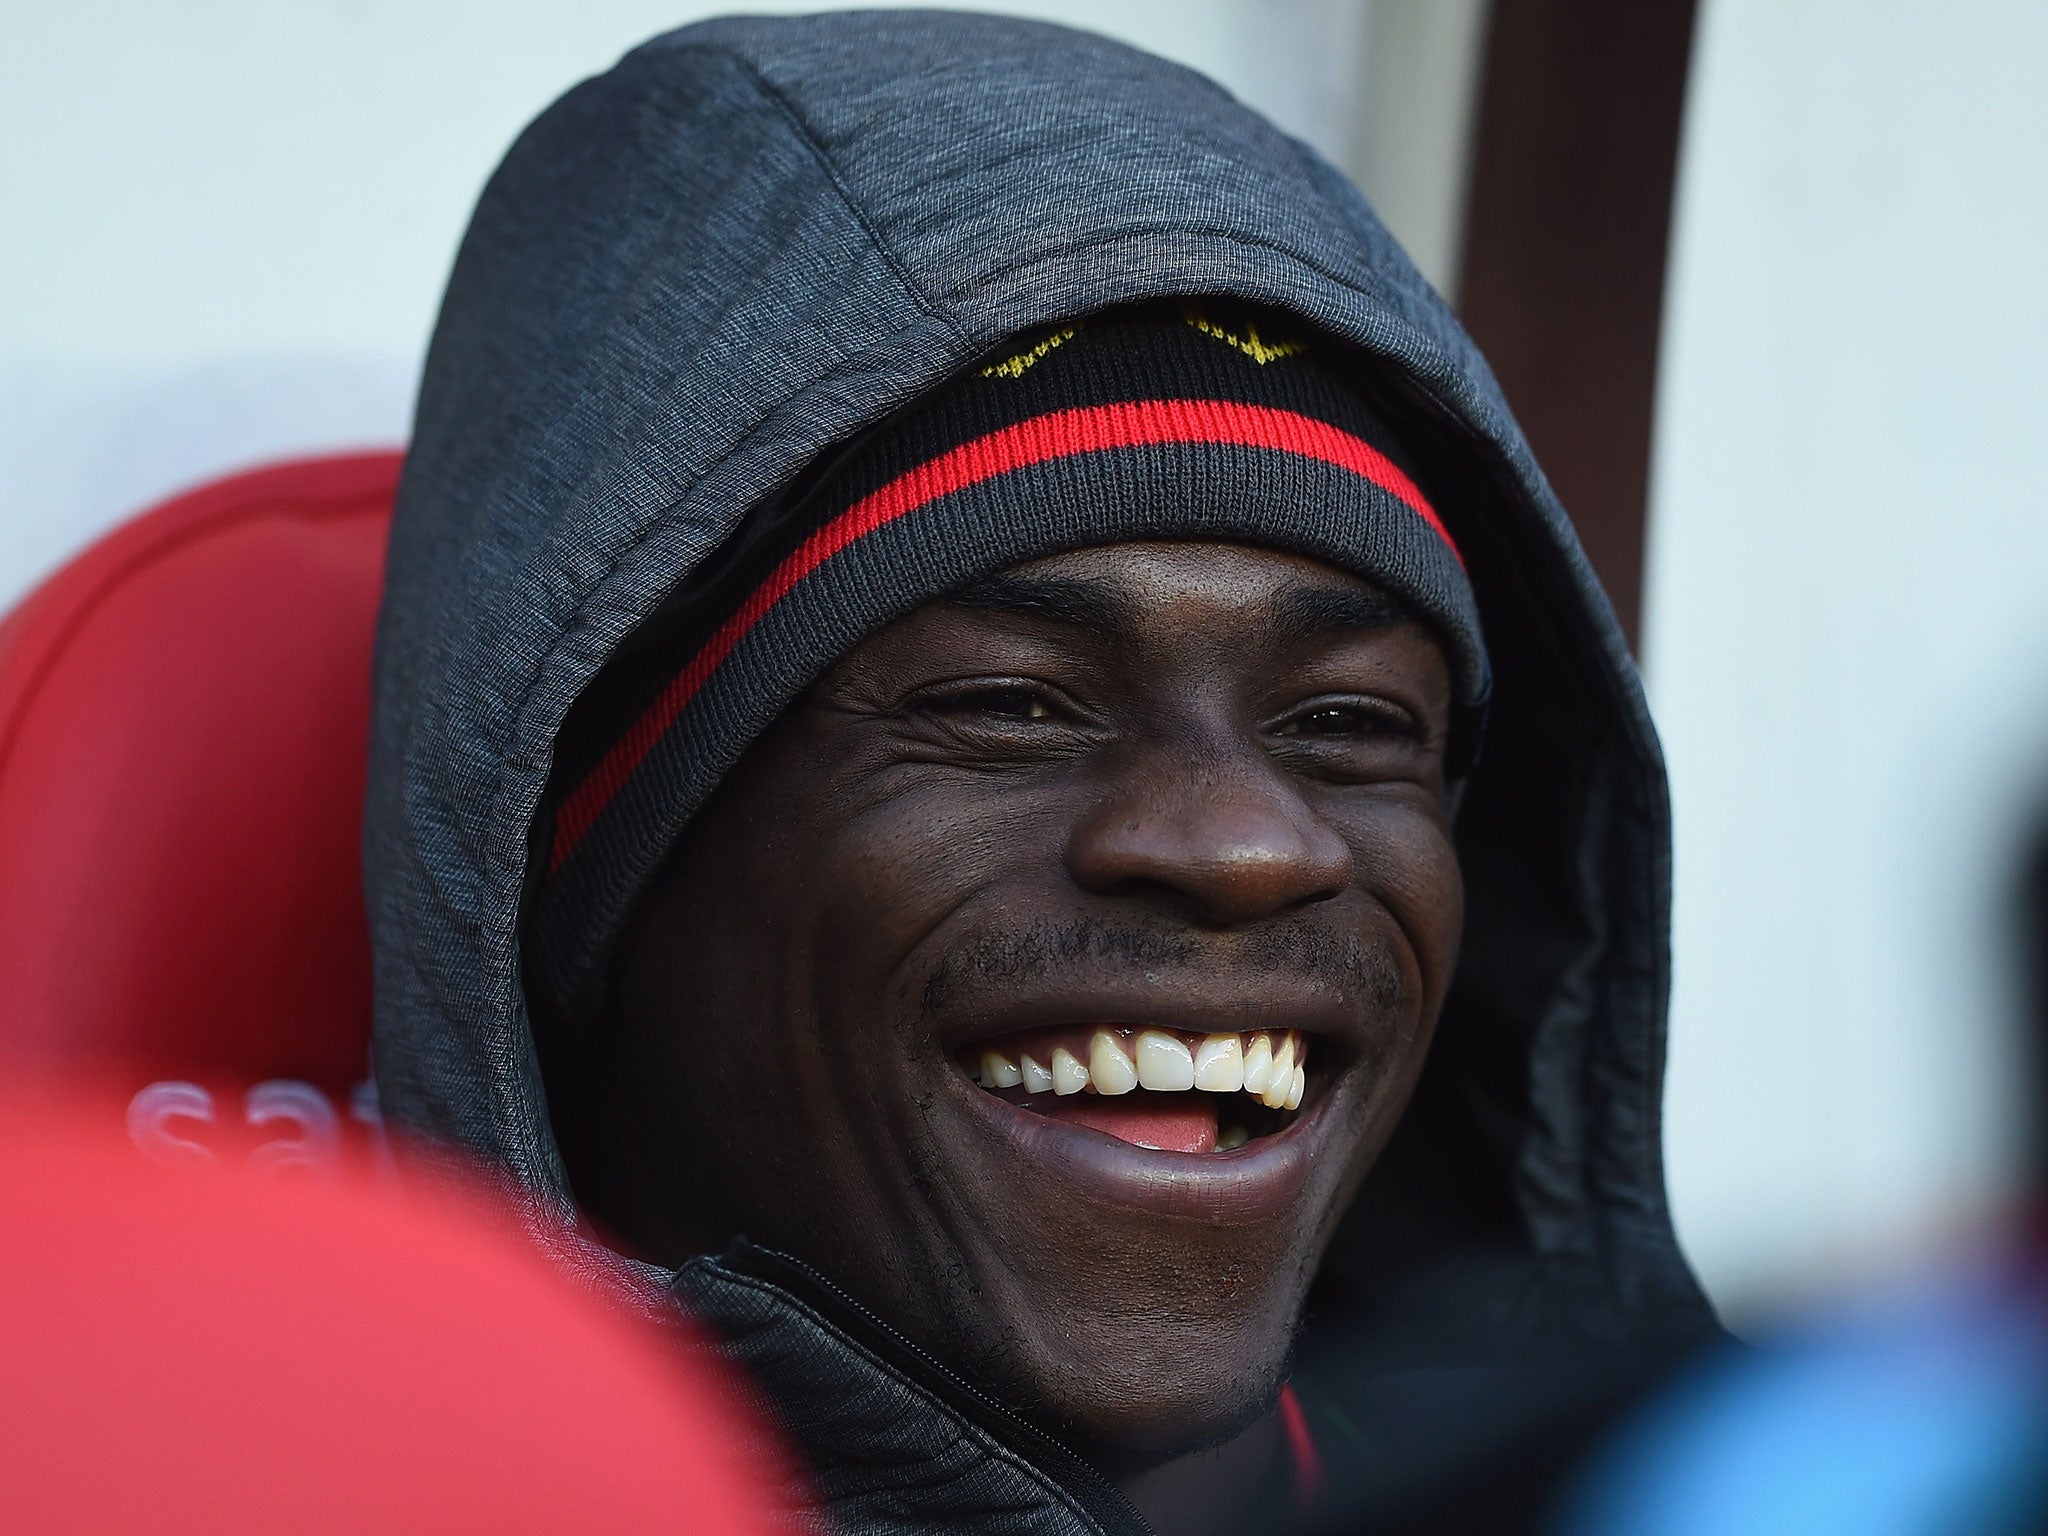 Mario Balotelli has shown he can still hit the target